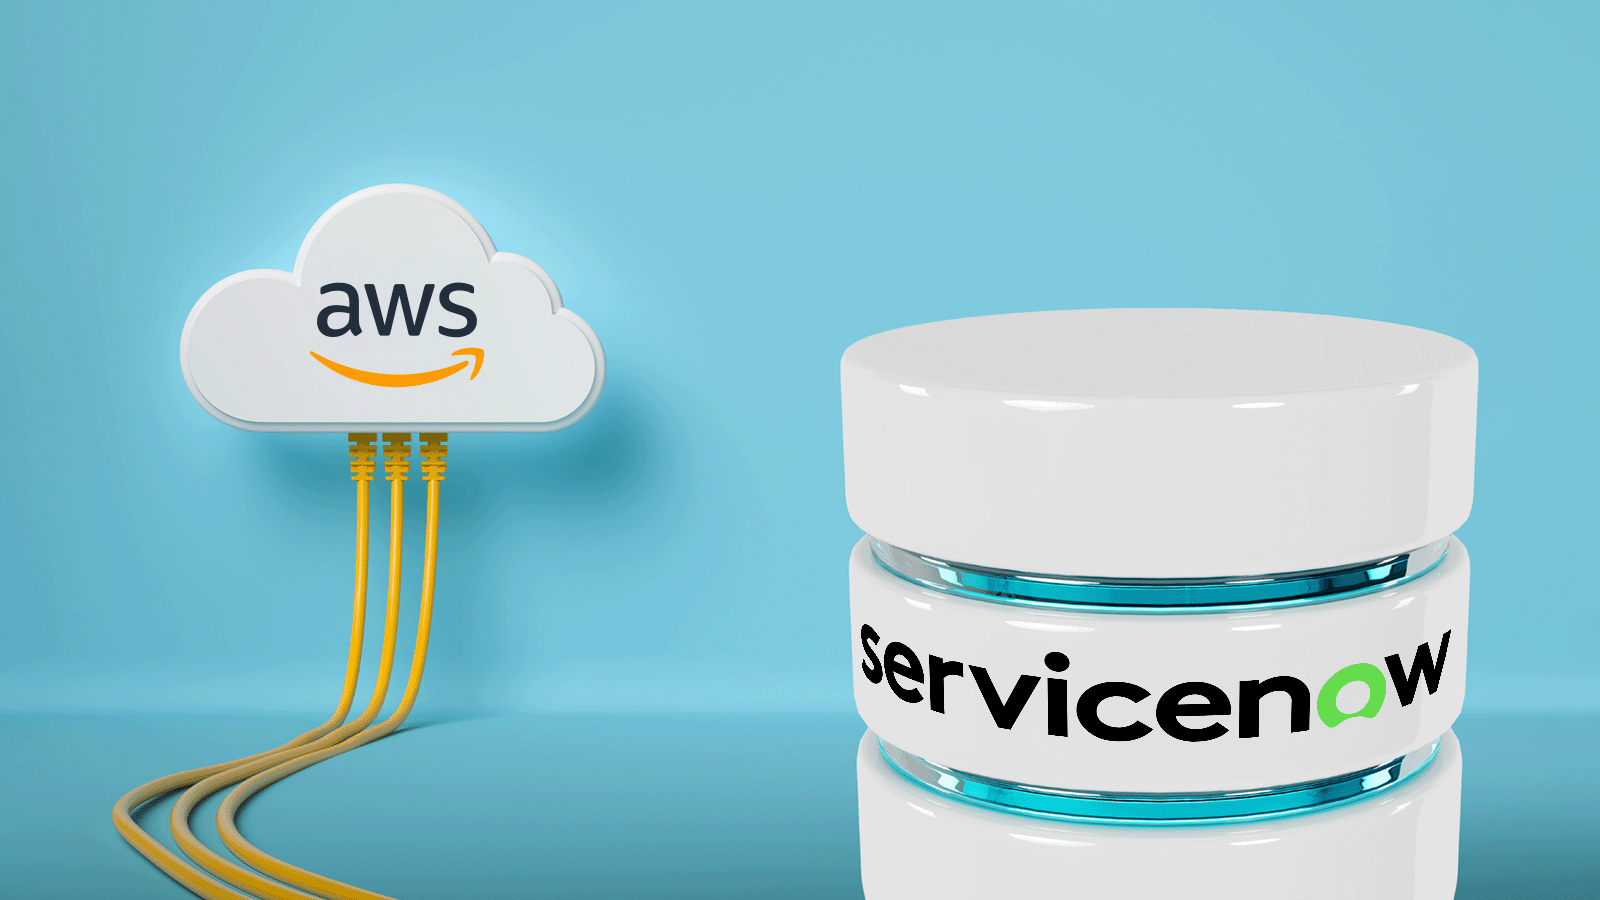 Automated ServiceNow AWS discovery via Turbot Guardrails provides comprehensive coverage and real-time accuracy across 100+ AWS services.